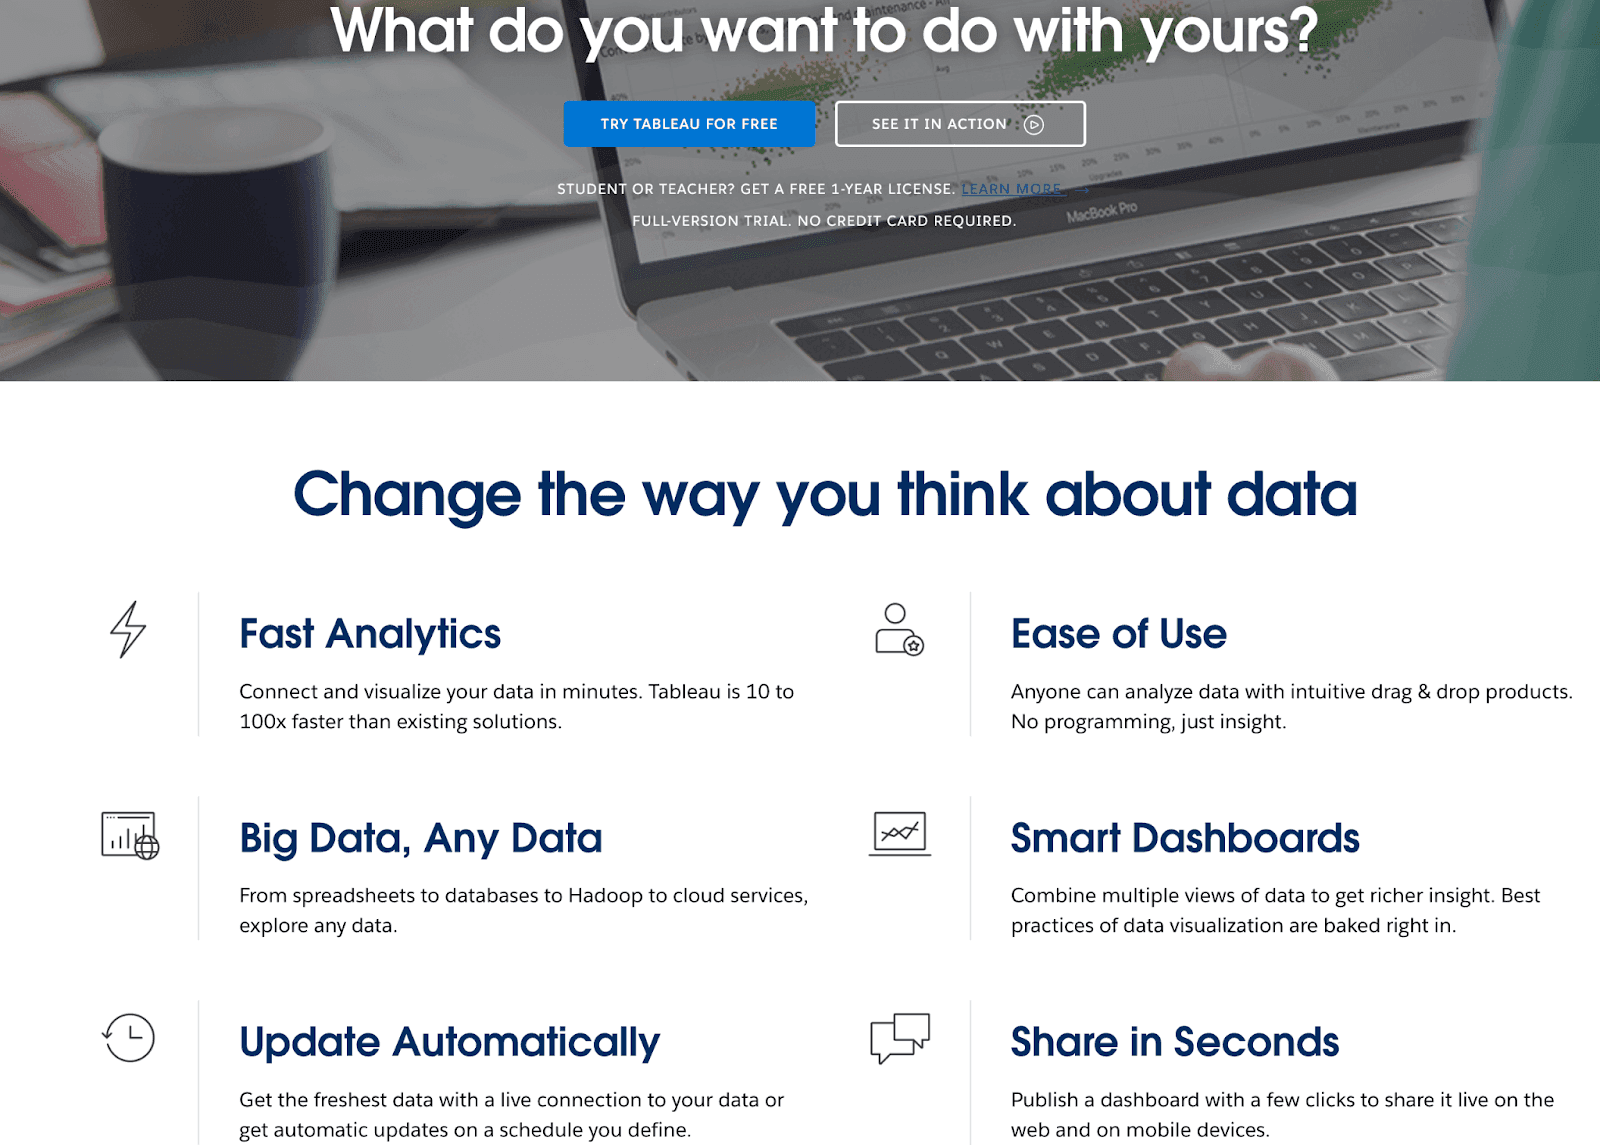 Change the way you think about data